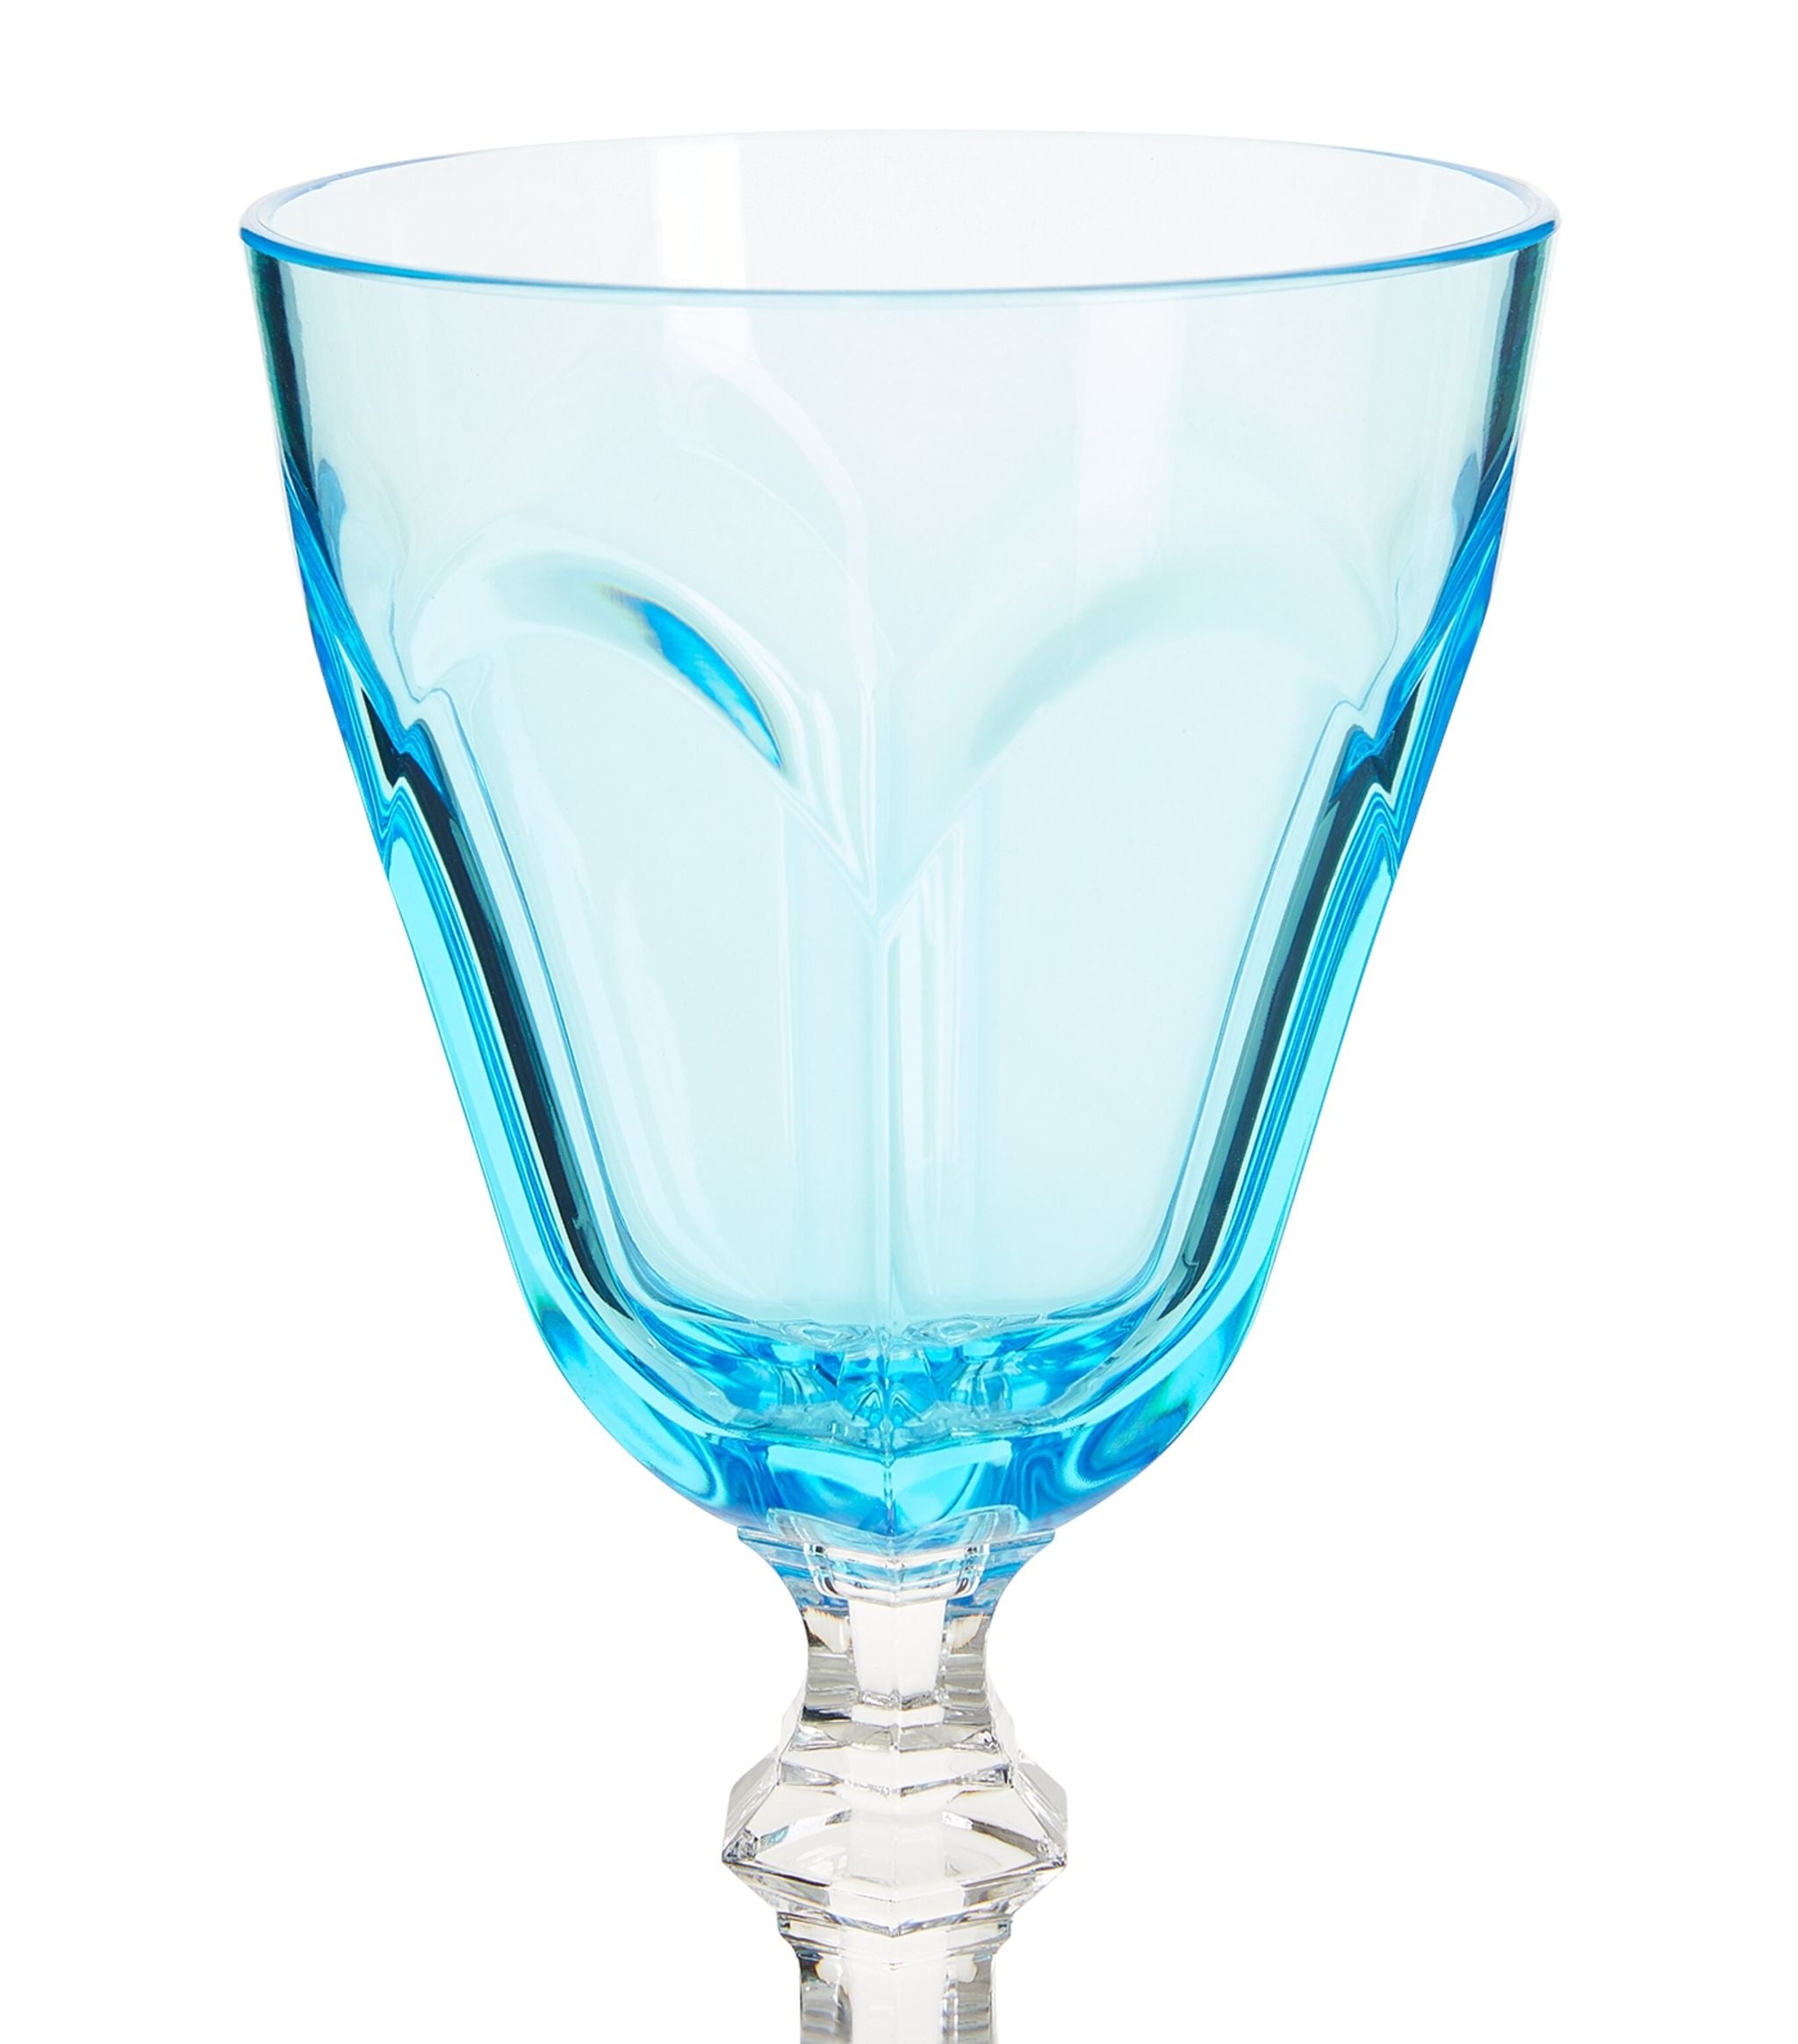 Water Glass Blue Set Of 6 250 ml